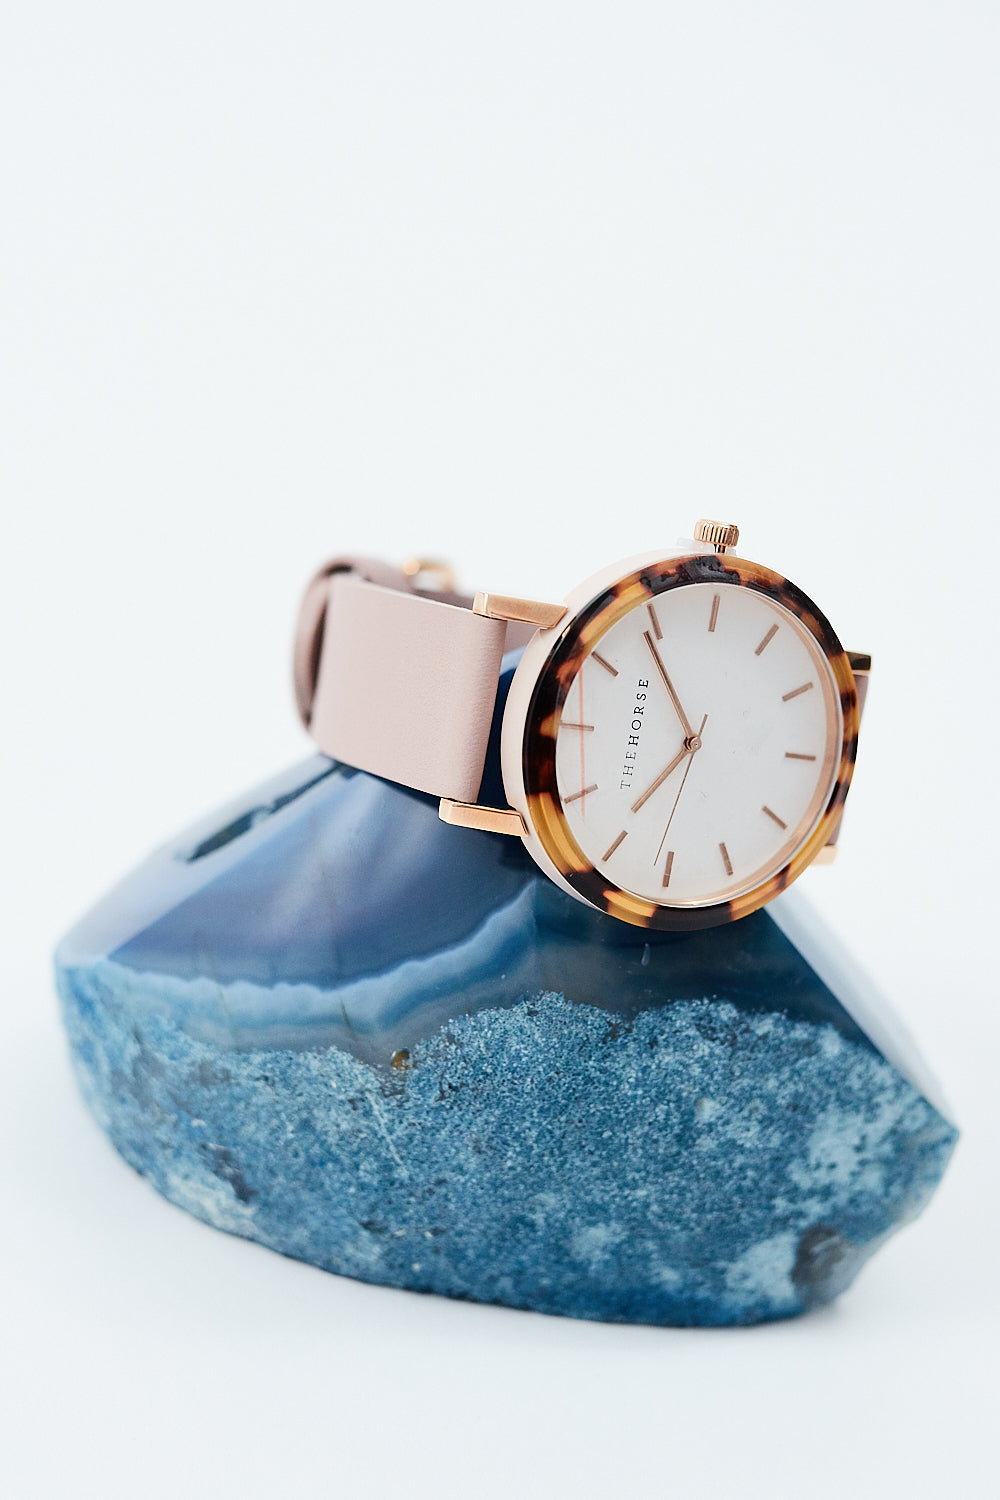 Tortoise Shell Case/ White Dial/ Rose Gold Indexing/ Blush Leather